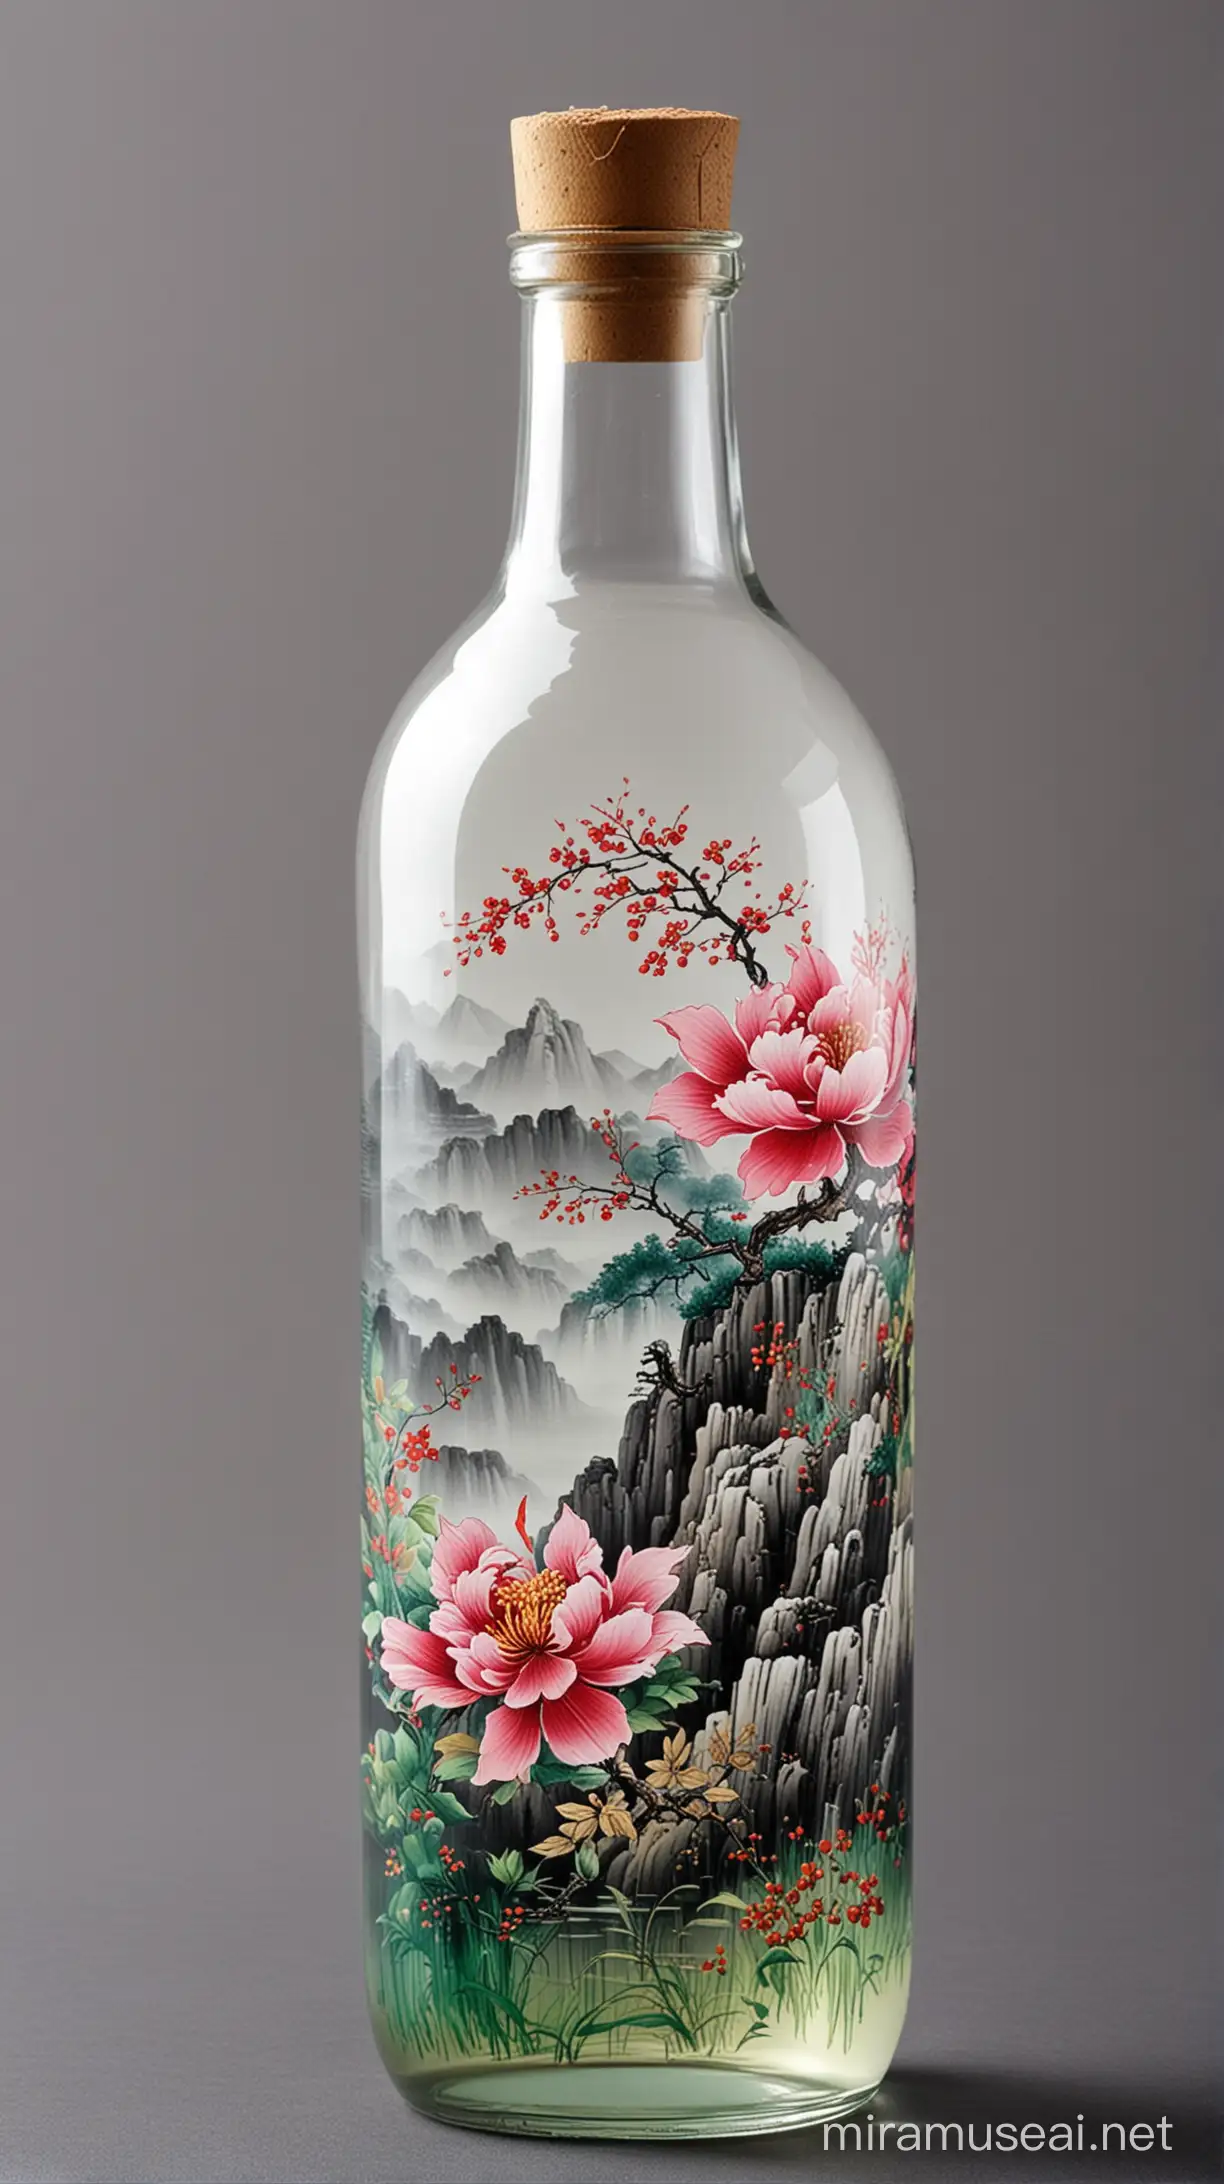 Chinese art painted on a glass bottle